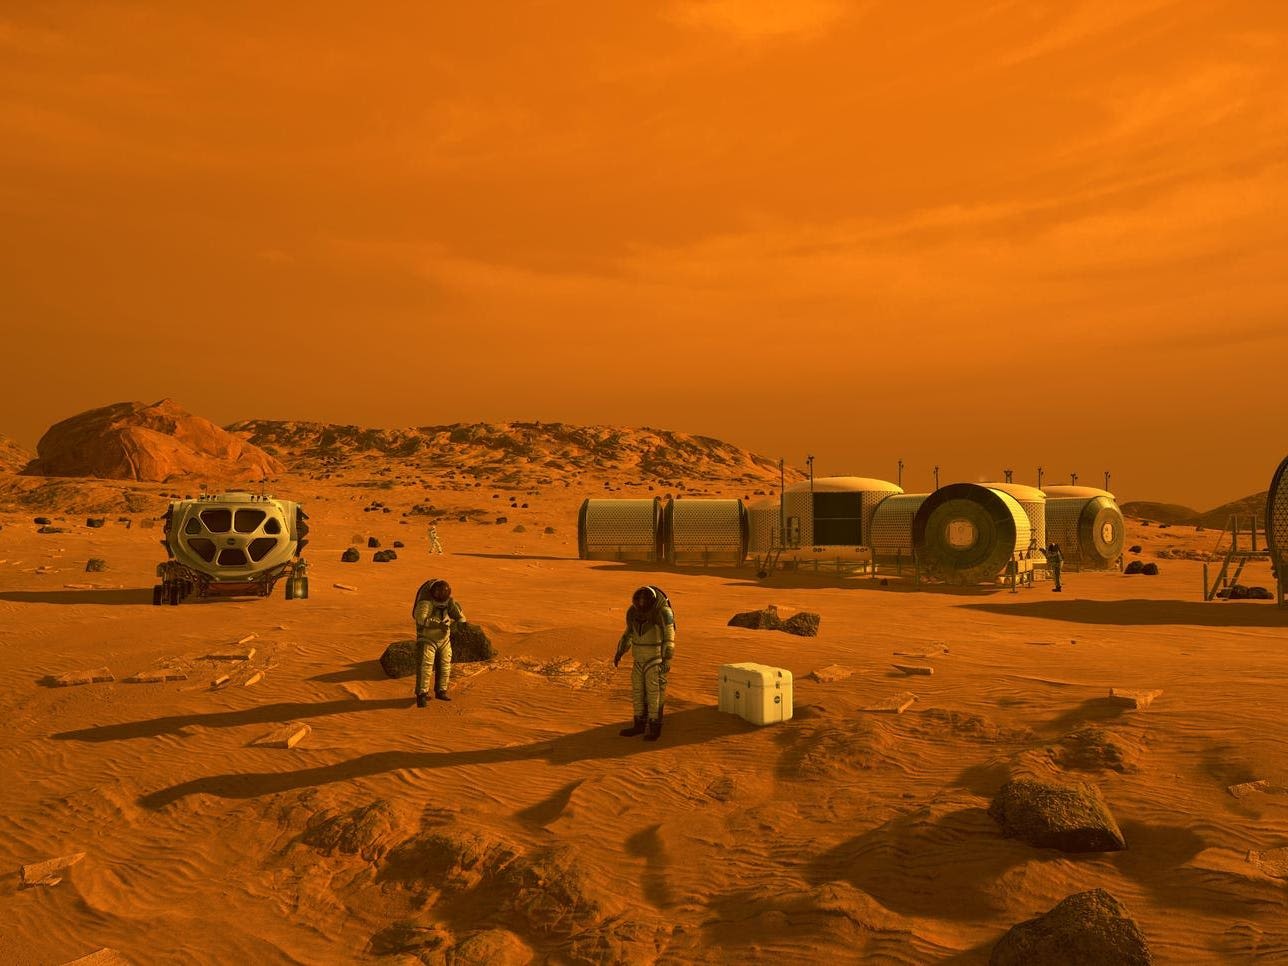 Why the US can't send humans to Mars